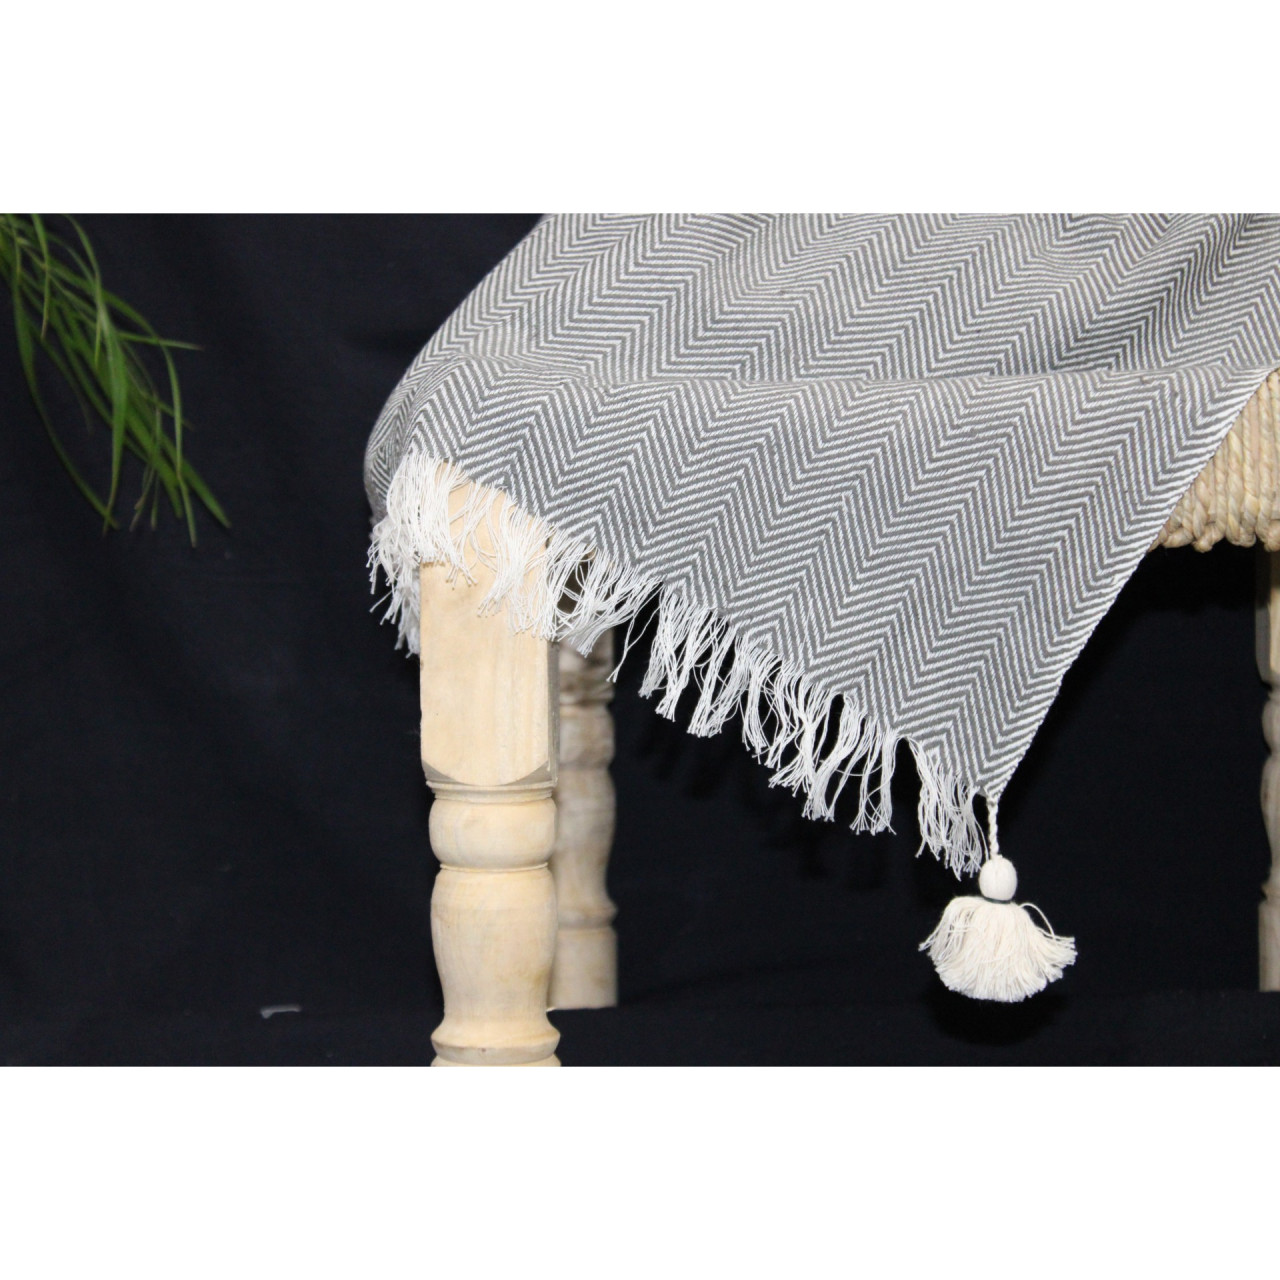 (1432) Cotton and khadi  Azo-free dyed throw from Bihar - Grey, white, pompoms, textured